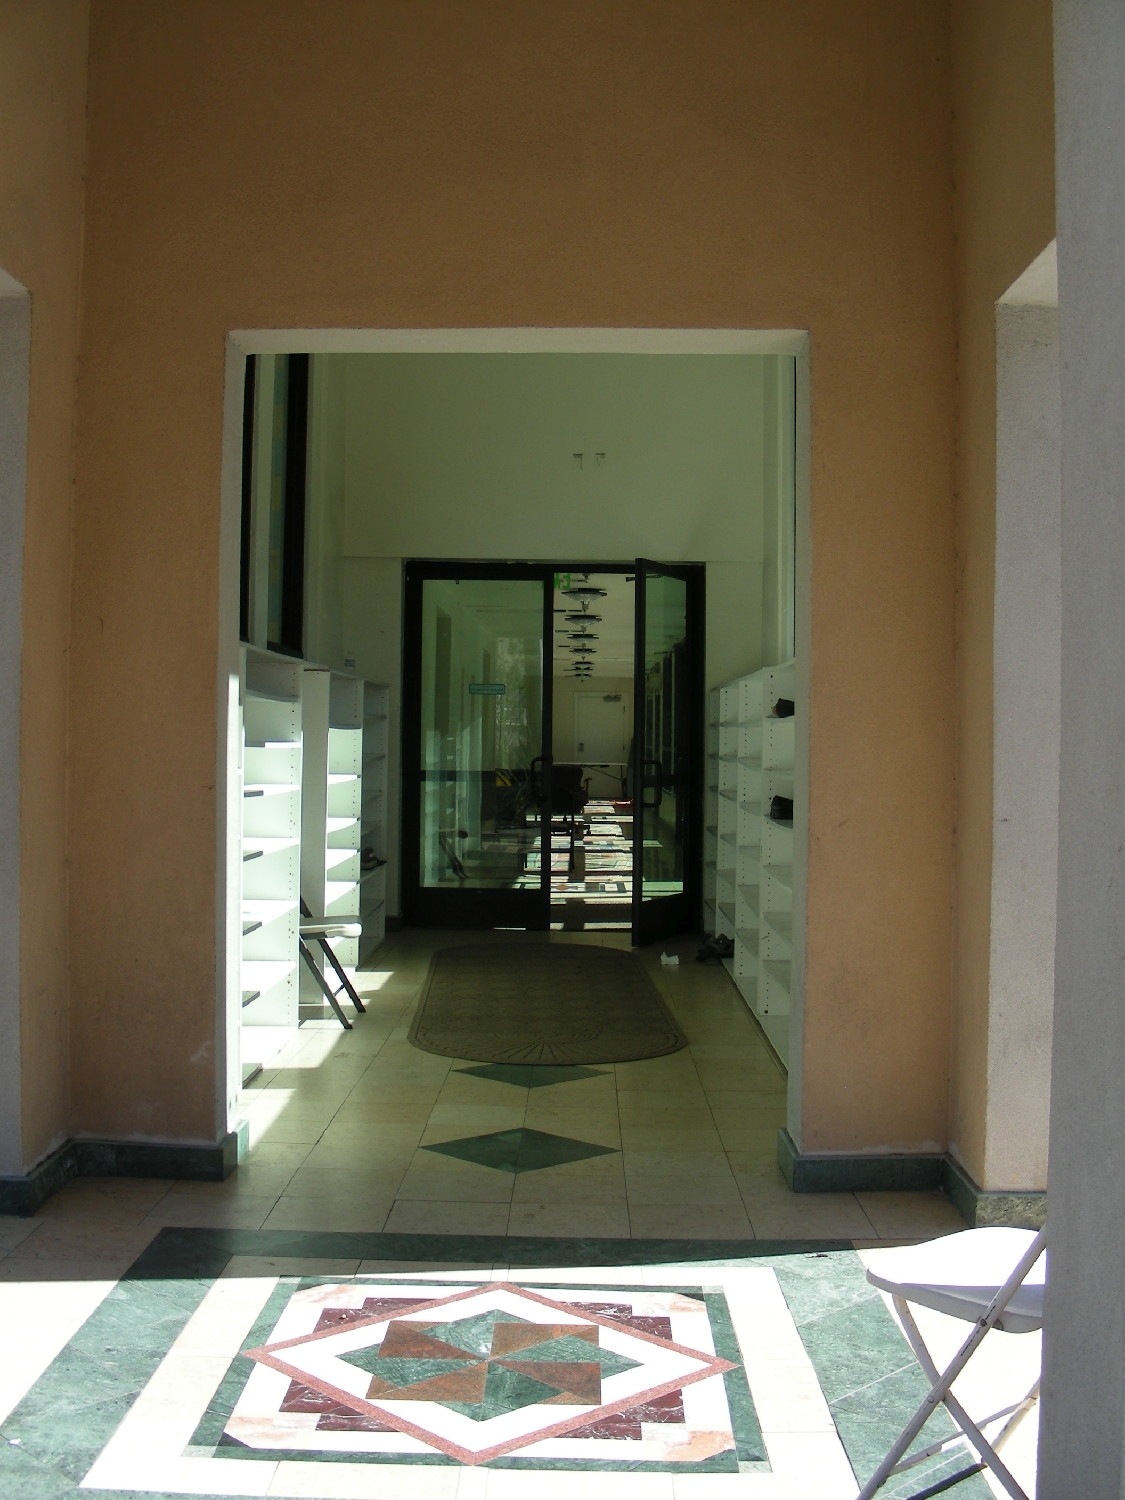 View within covered entrance portico, with shoe racks